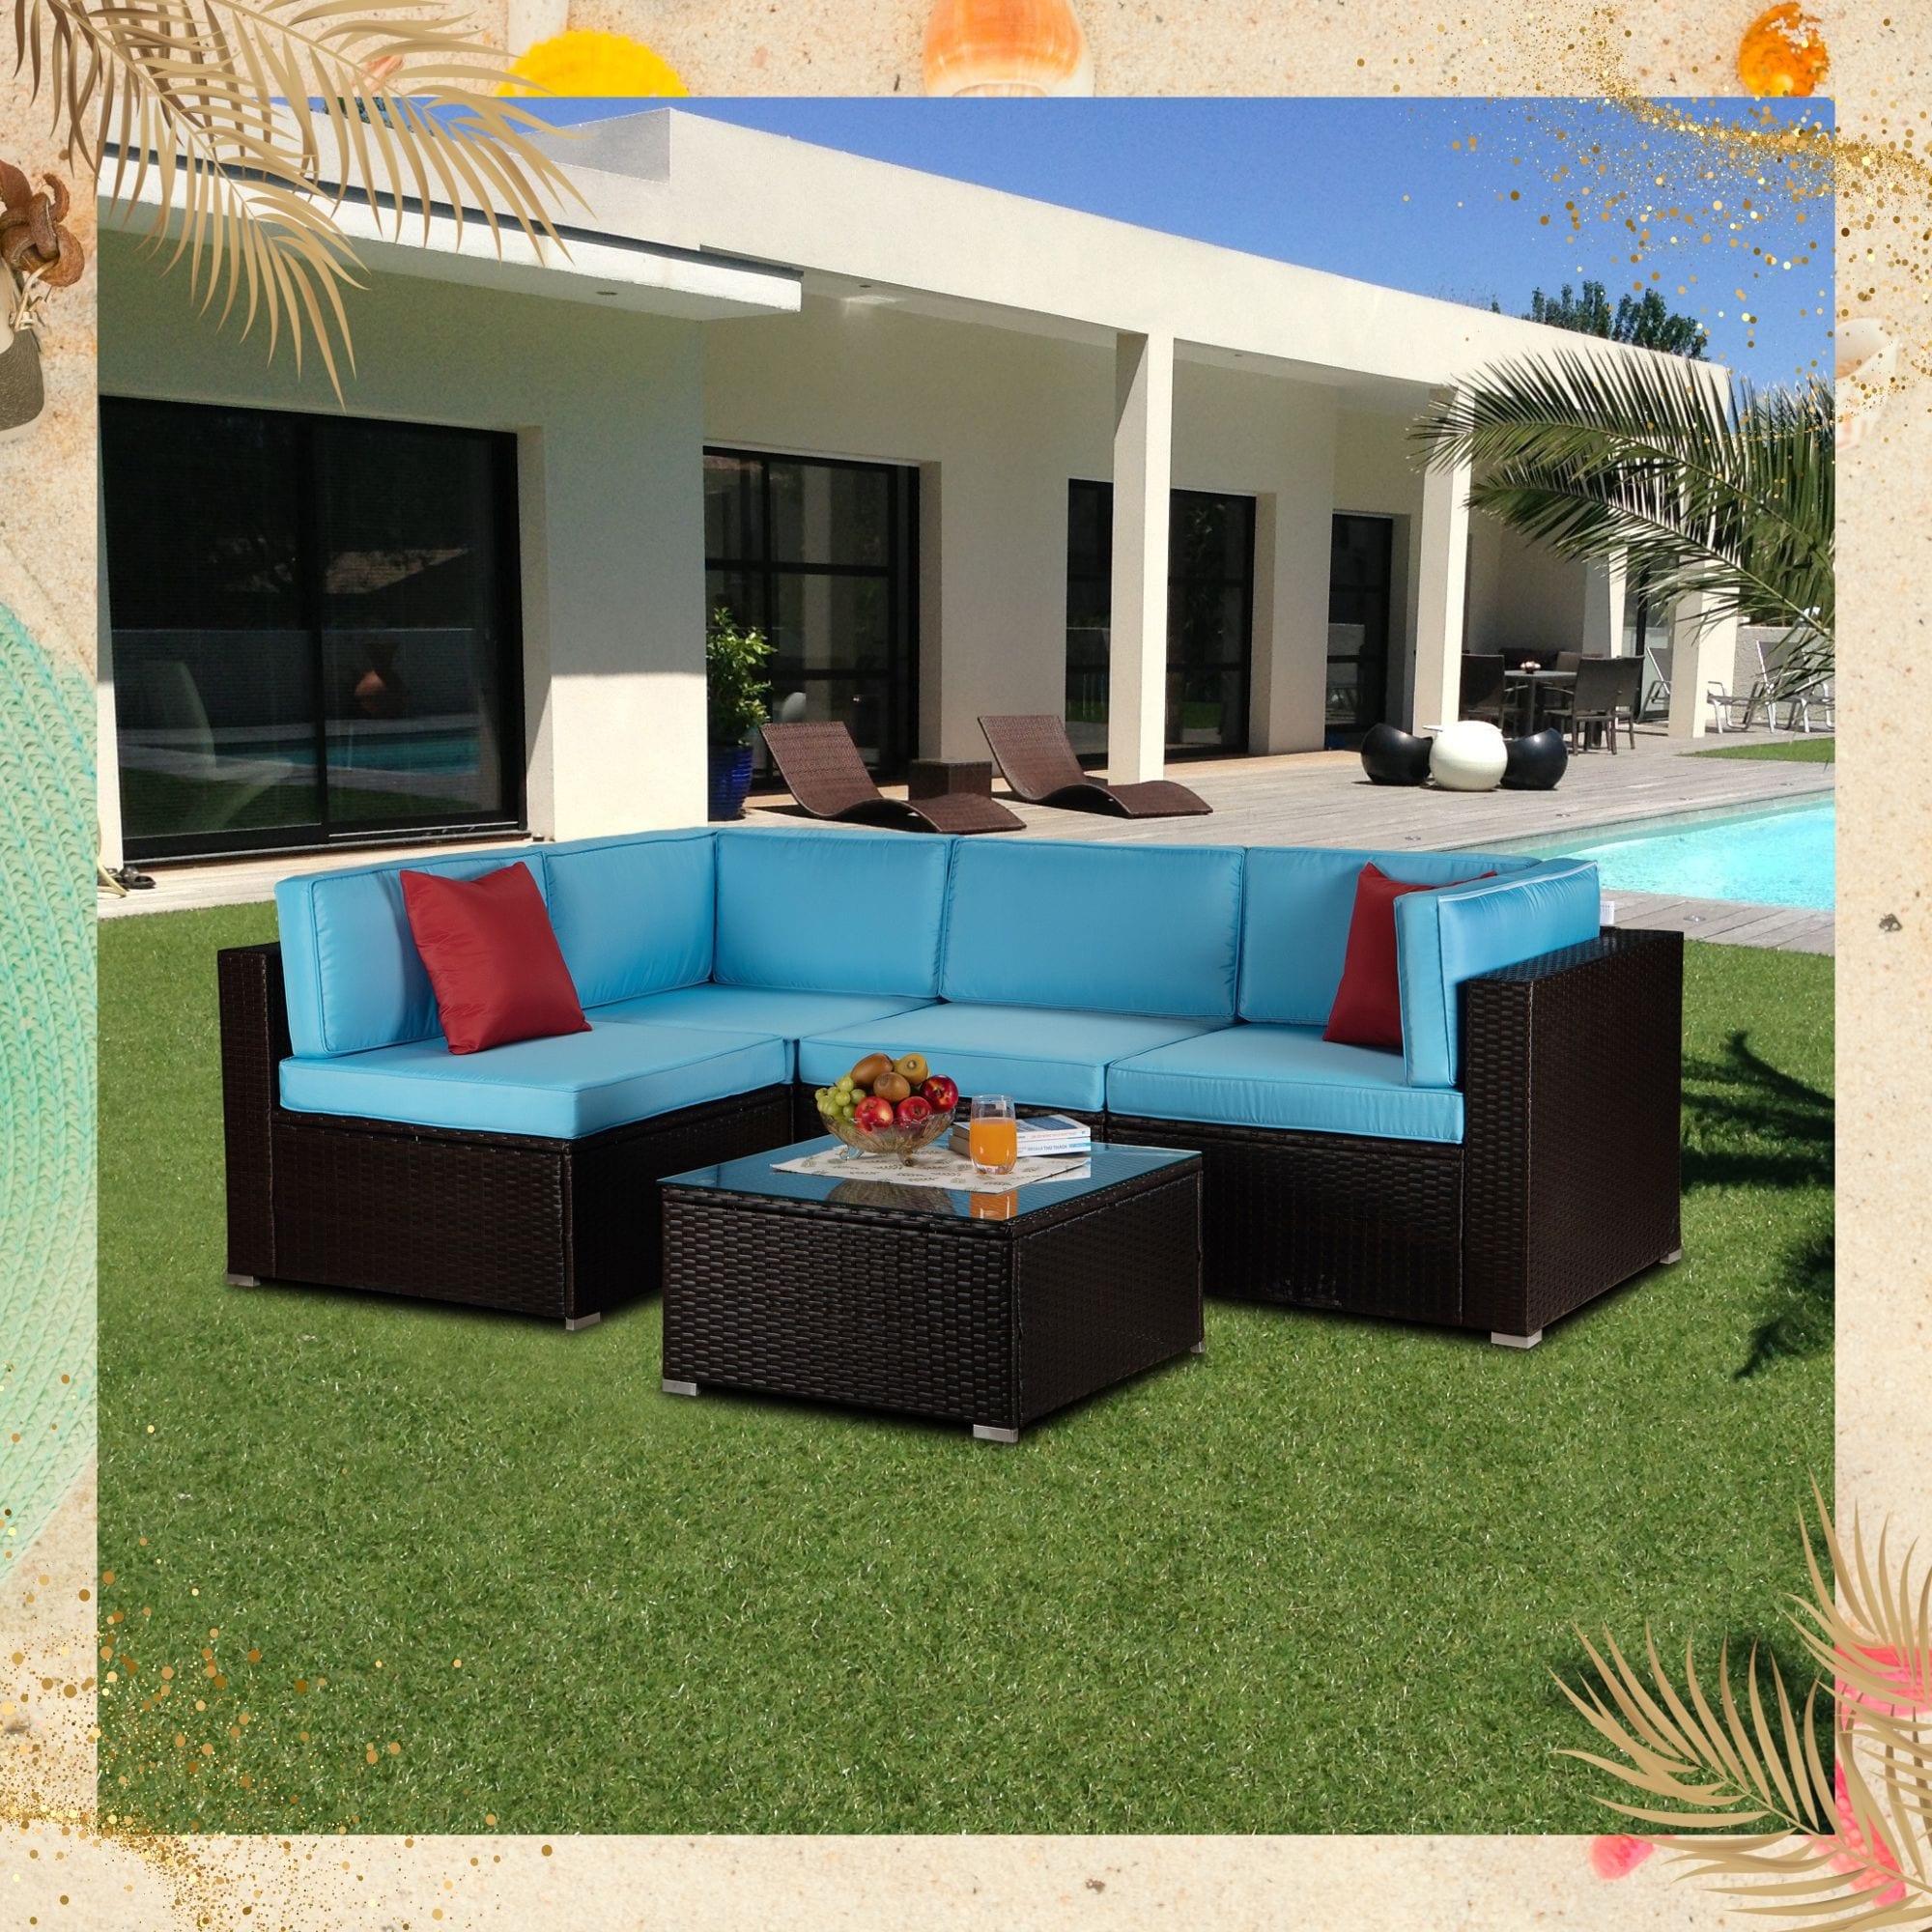 5-piece Rattan Wicker Sectional Sofa Set With Glass Table